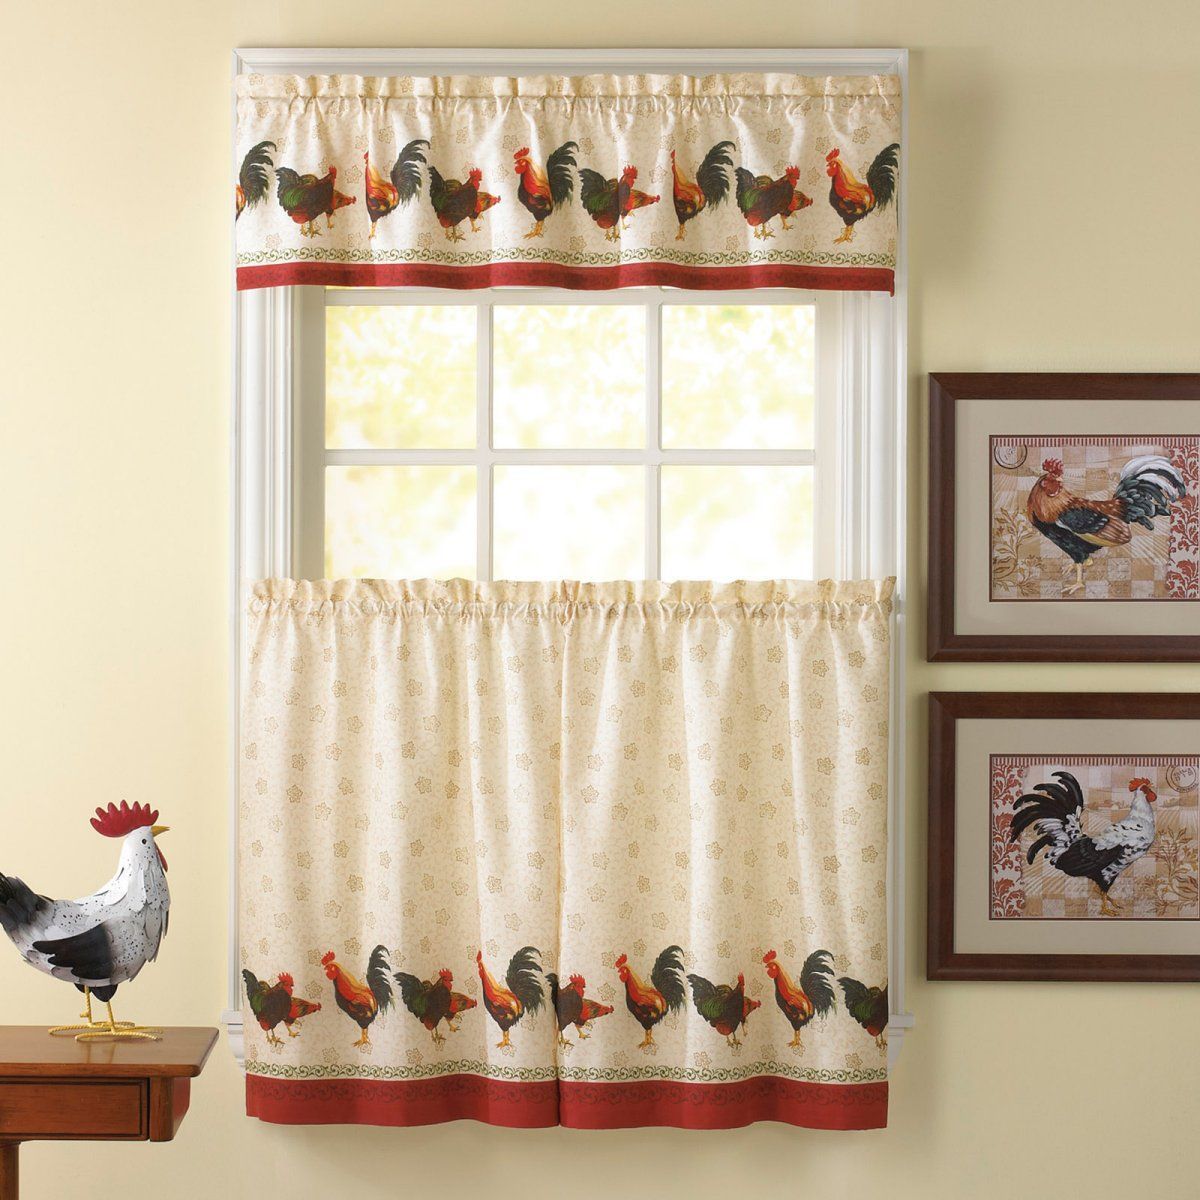 Awesome Kitchen Curtains Sets #1 Country Rooster Kitchen Within Traditional Two Piece Tailored Tier And Swag Window Curtains Sets With Ornate Rooster Print (View 8 of 20)